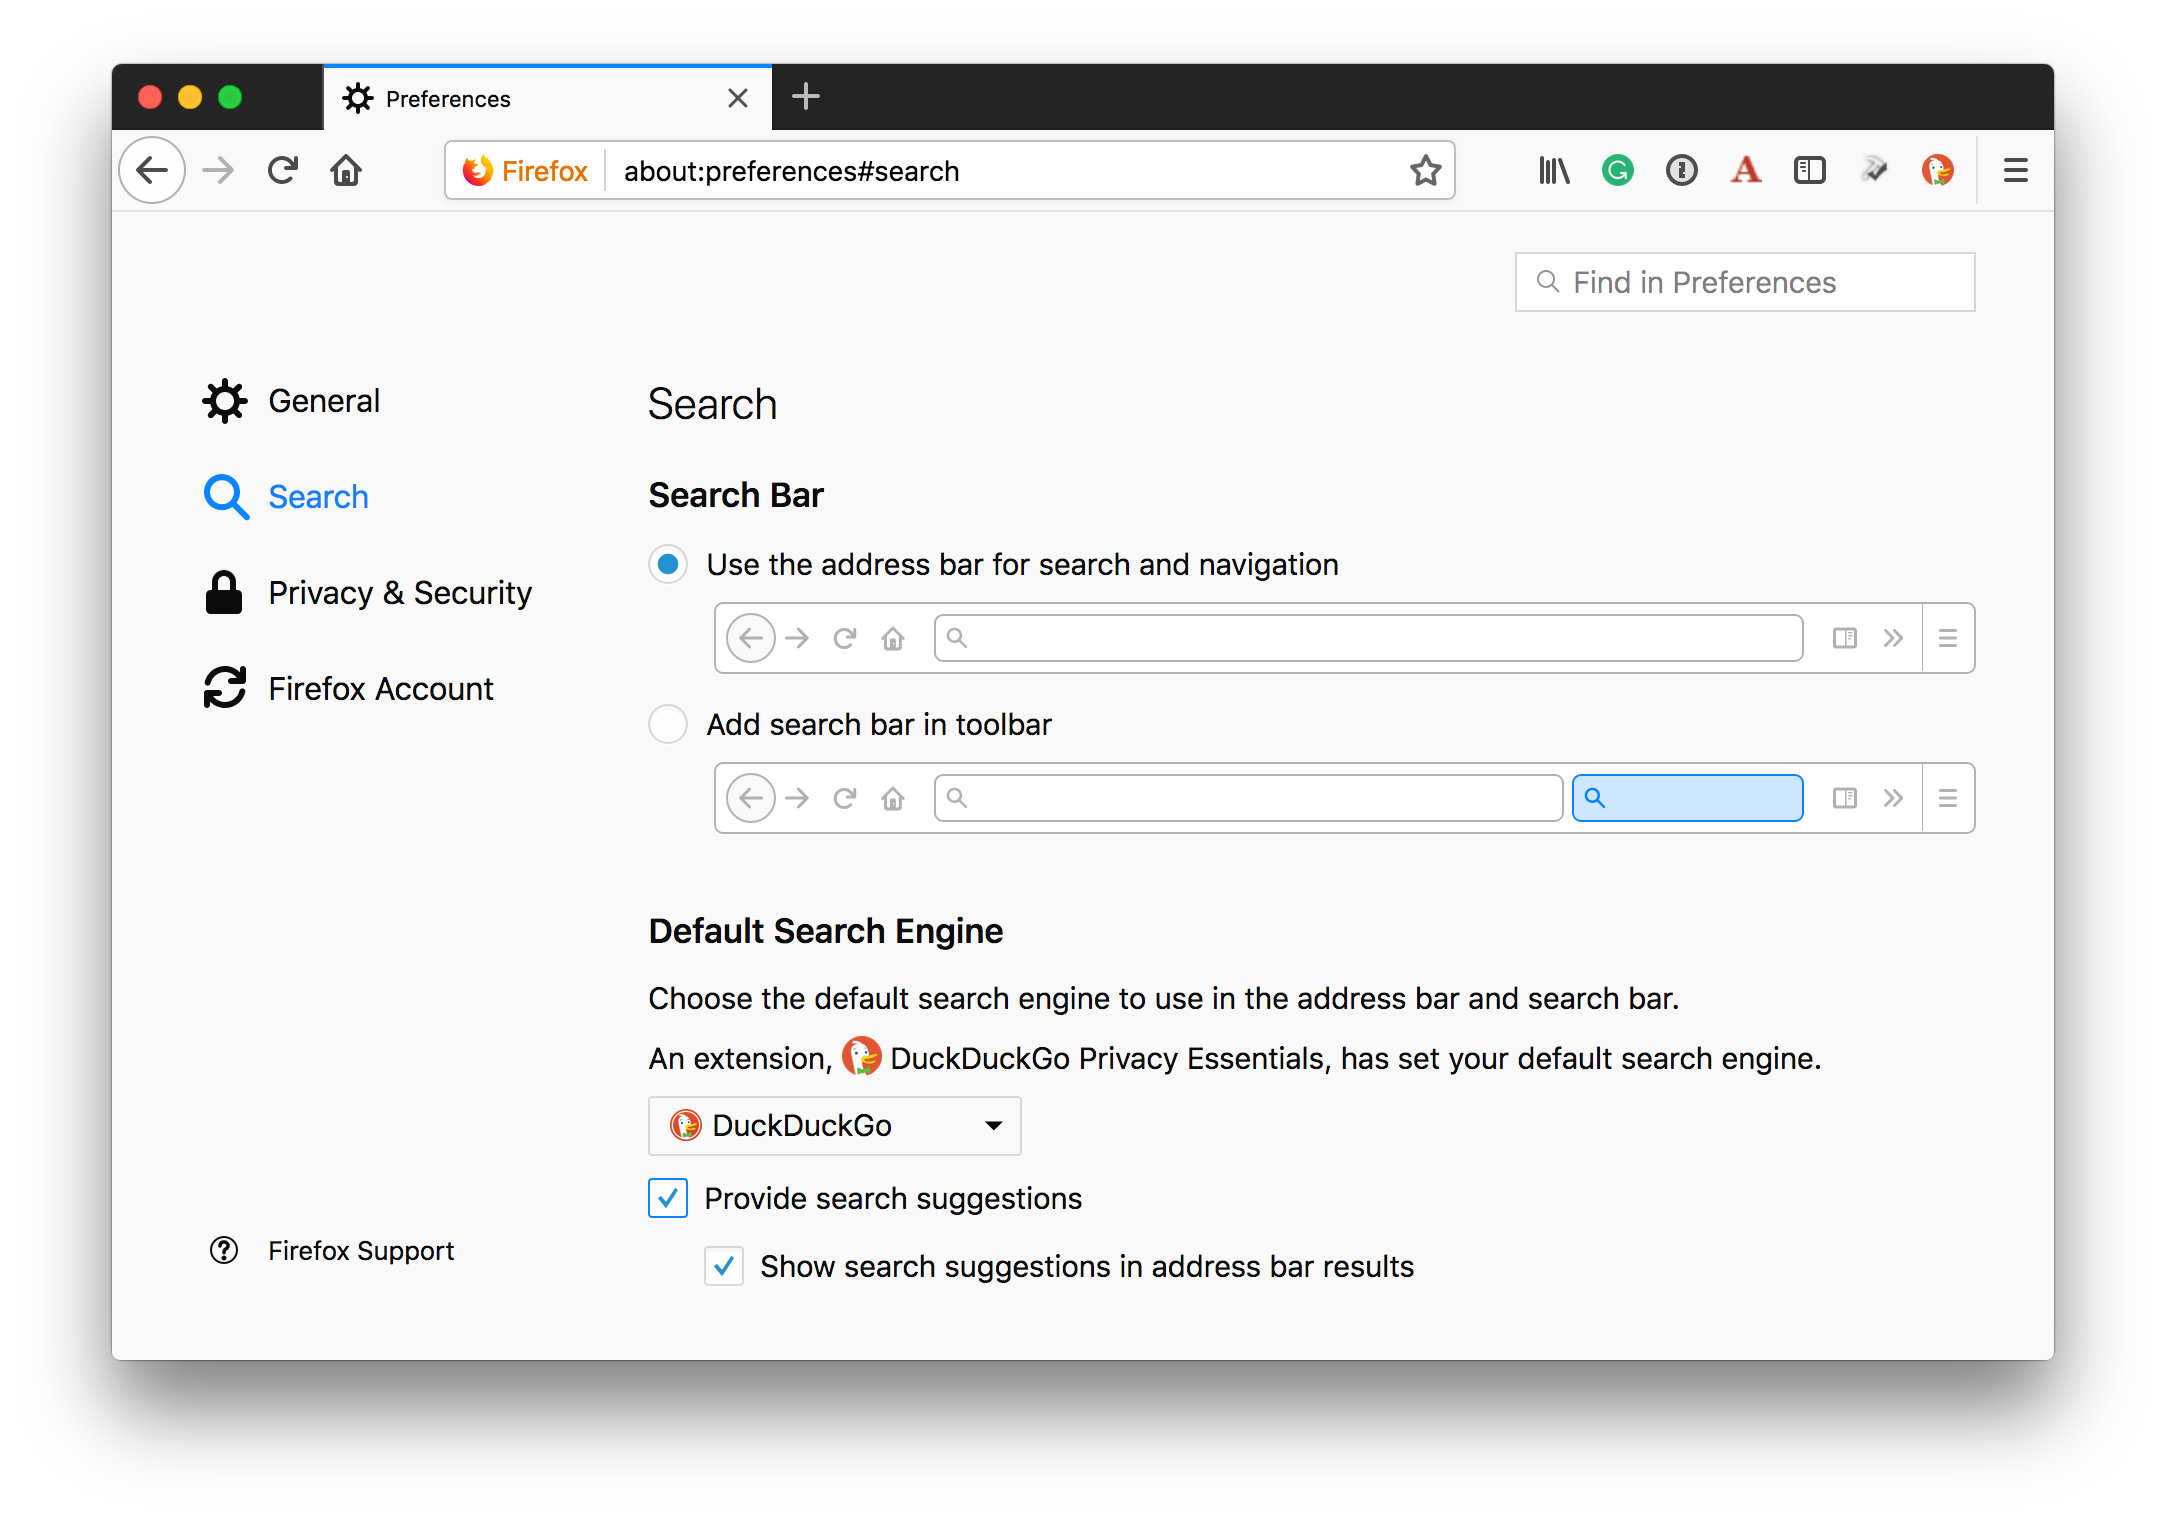 Changing Firefox’s default search engine to DuckDuckGo